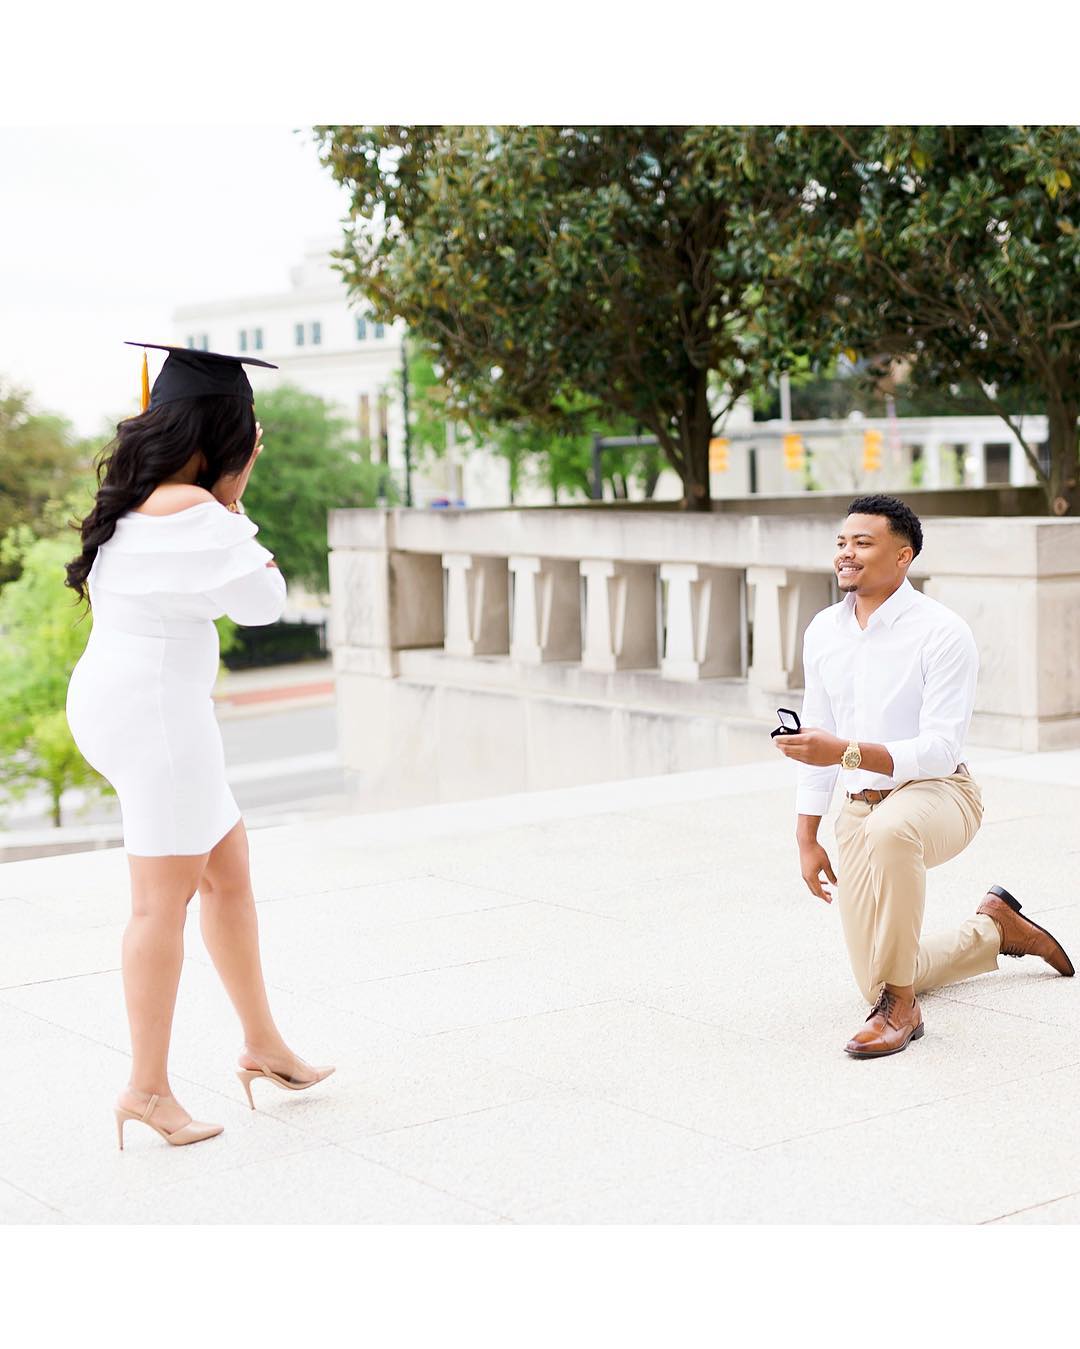 This Man Proposed At His Fiancée's Graduation And Won Over The Internet